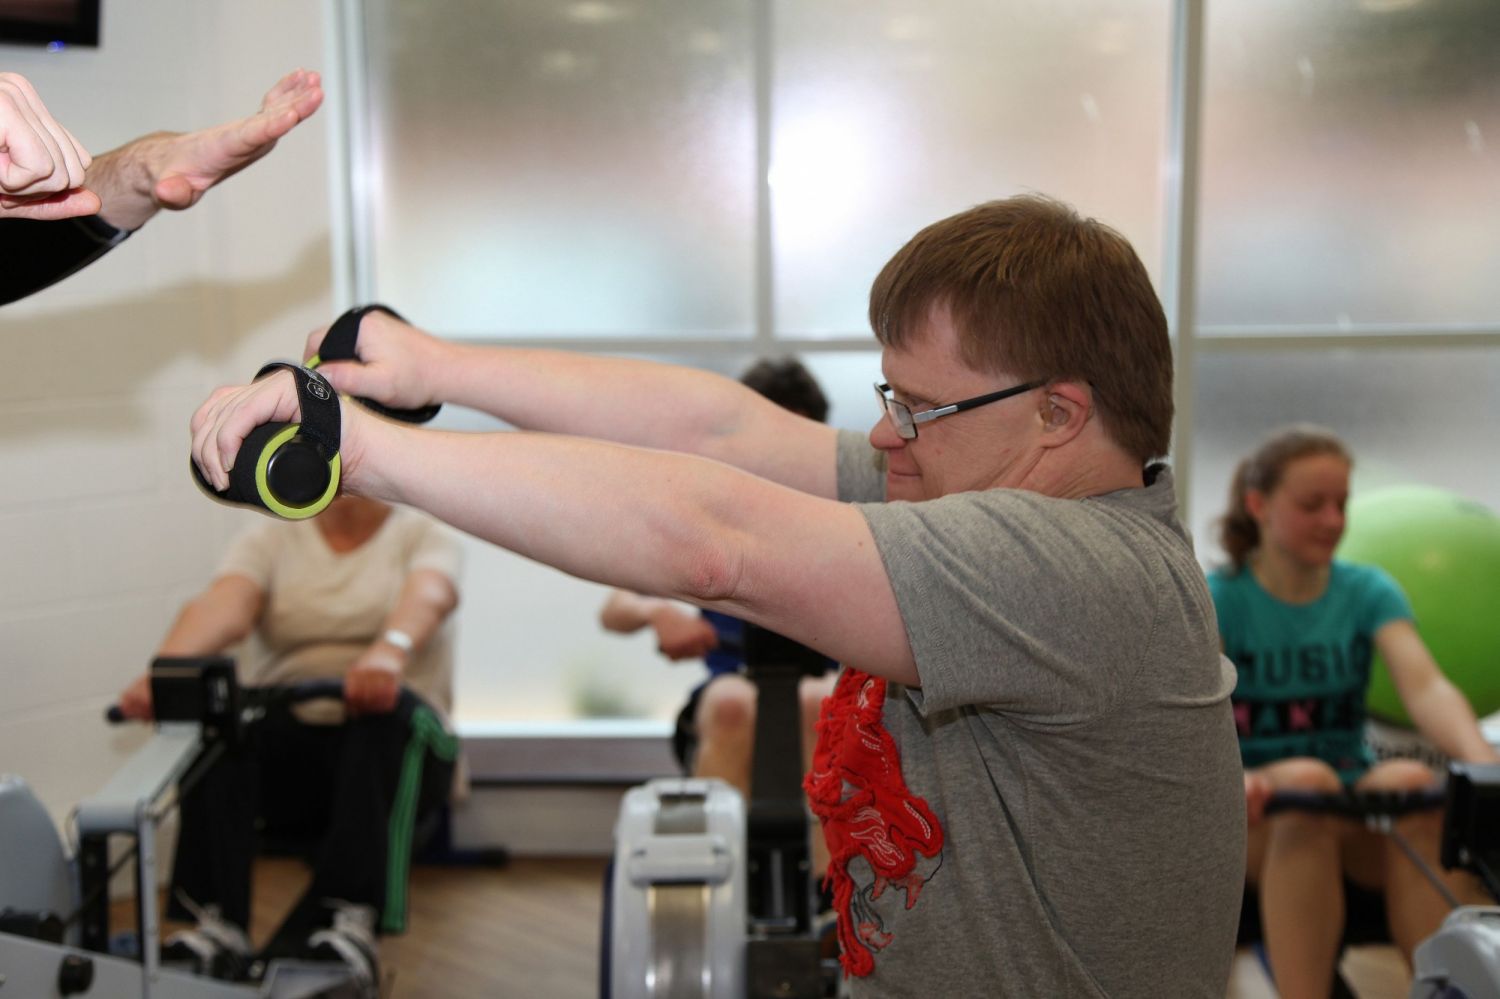 Annual Survey Highlights Growing Need to Promote Sport for Disabled People